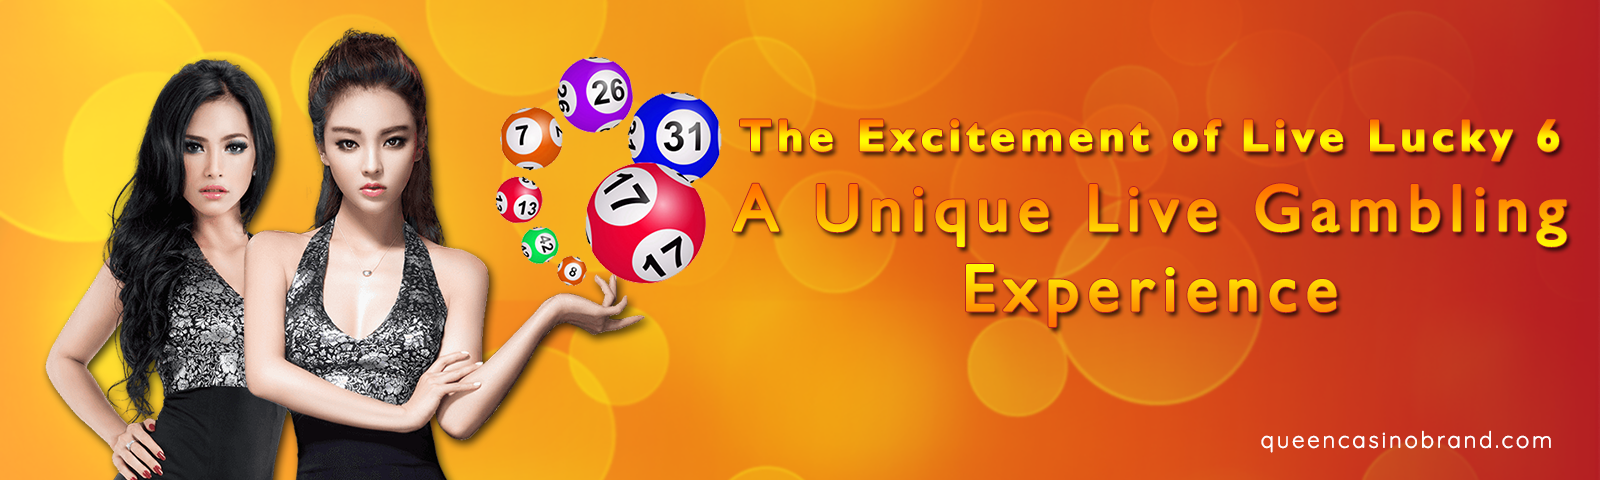 The Excitement of Live Lucky 6 A Unique Live Gambling Experience